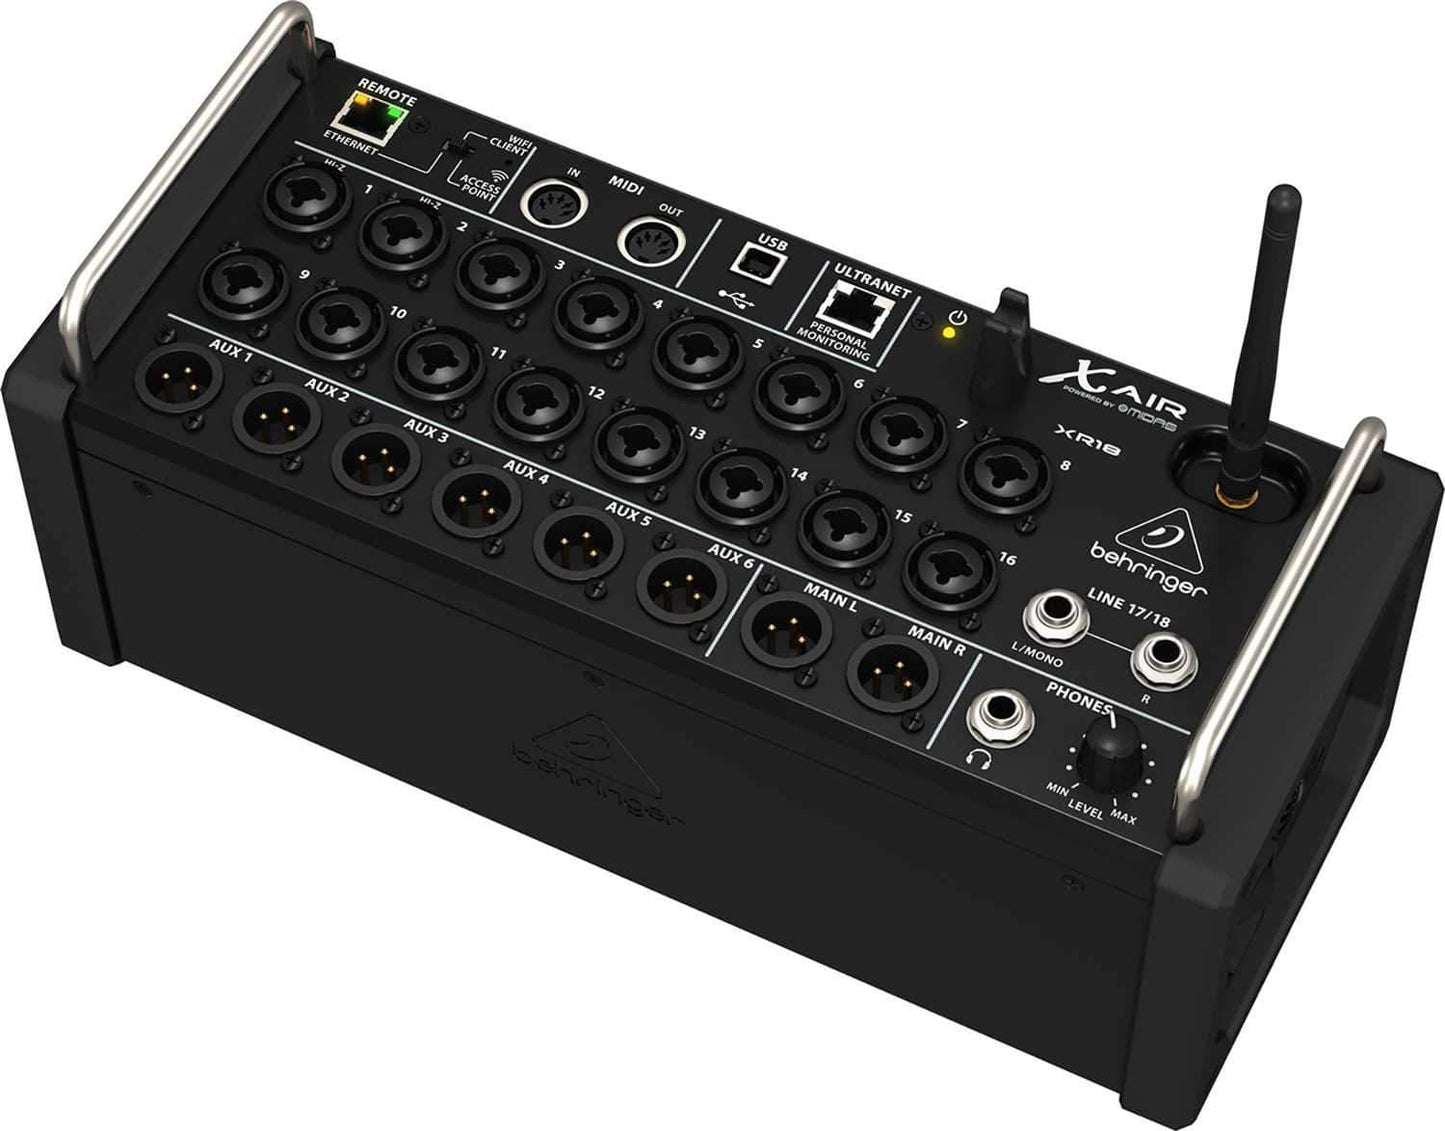 Behringer X Air XR18 Digital Mixer with Gator Bag - PSSL ProSound and Stage Lighting